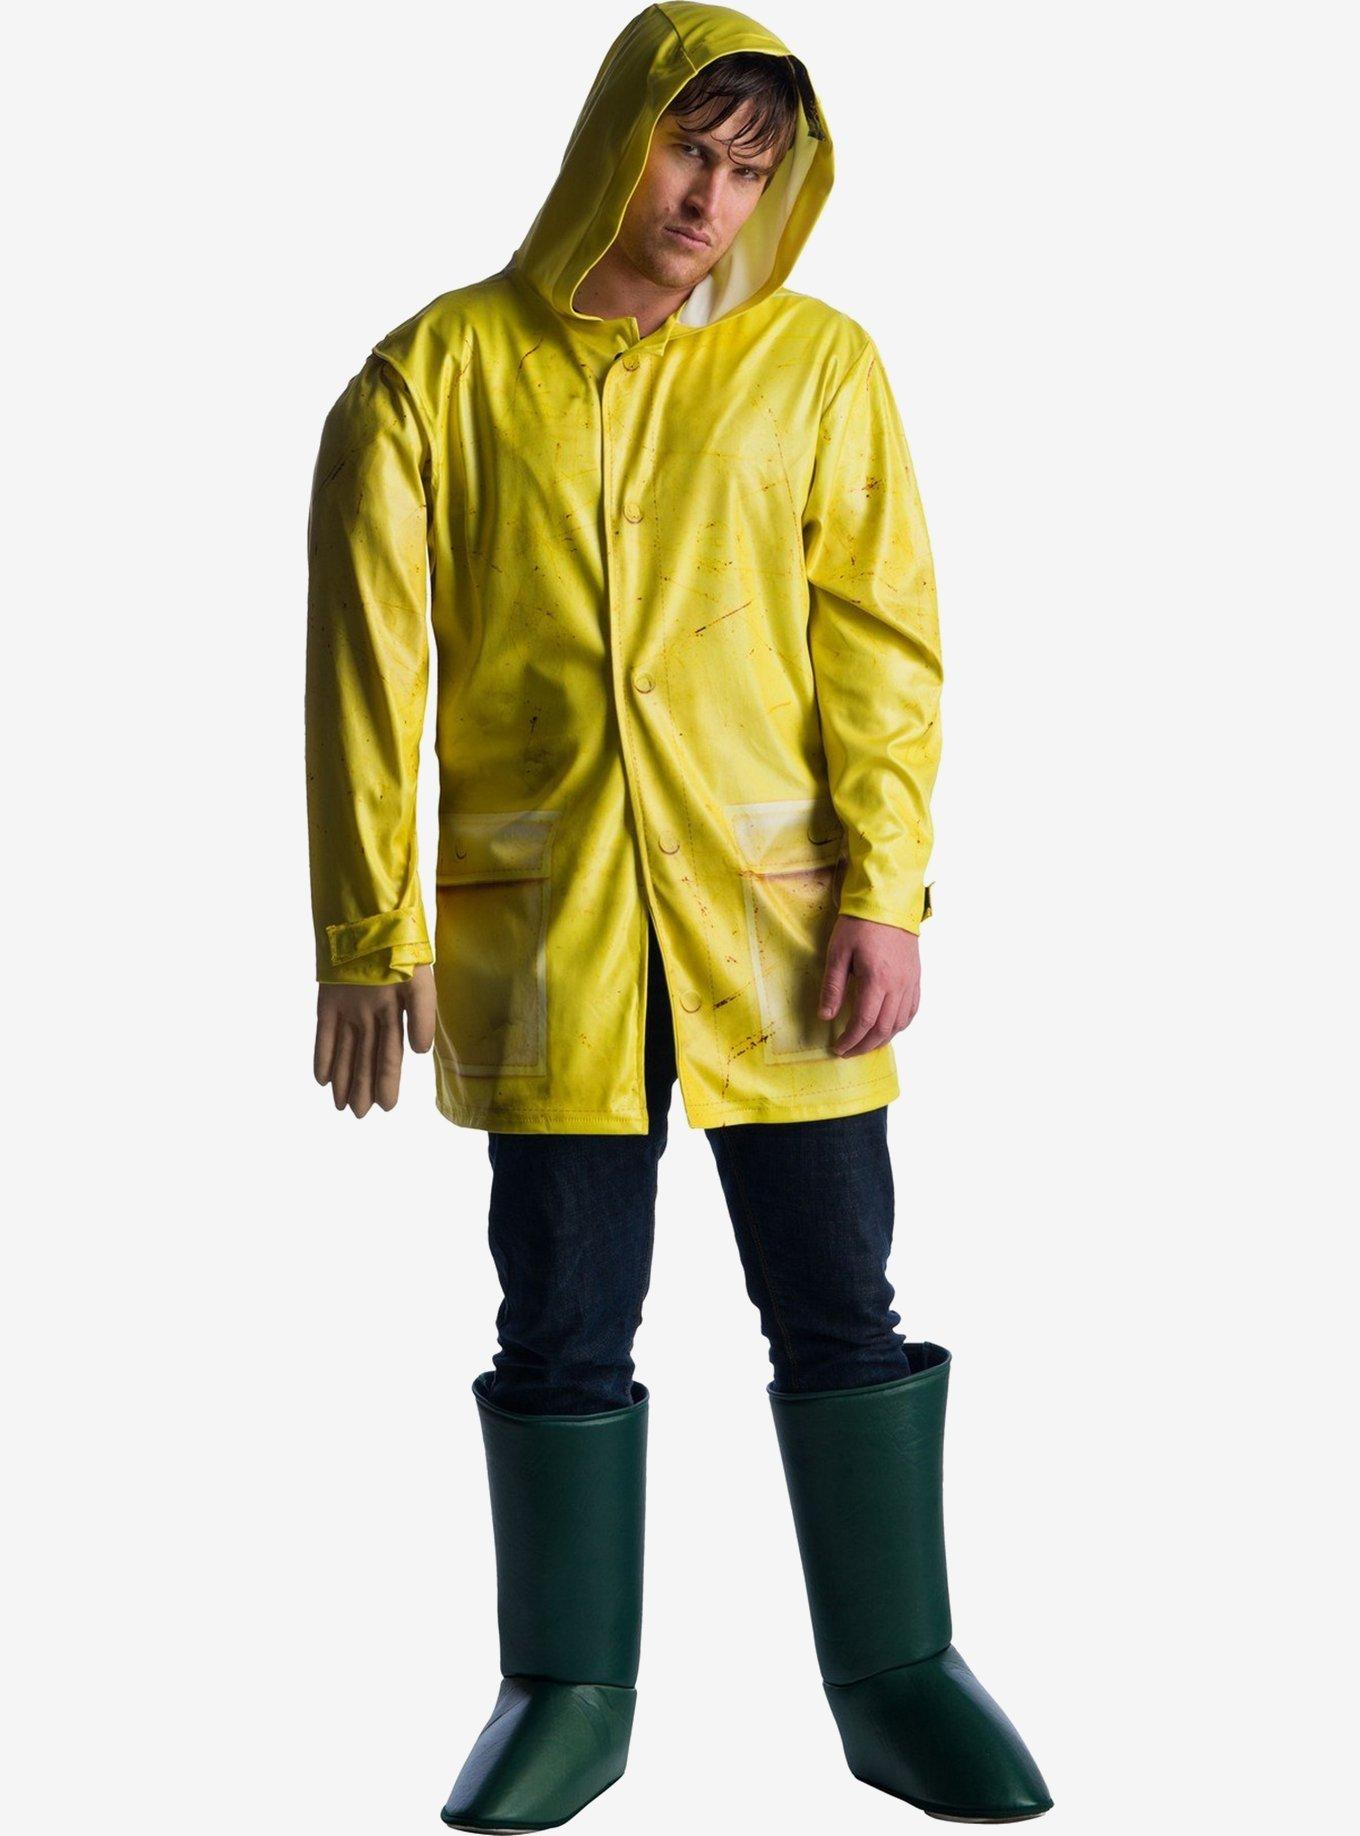 IT Georgie Deluxe Costume | BoxLunch